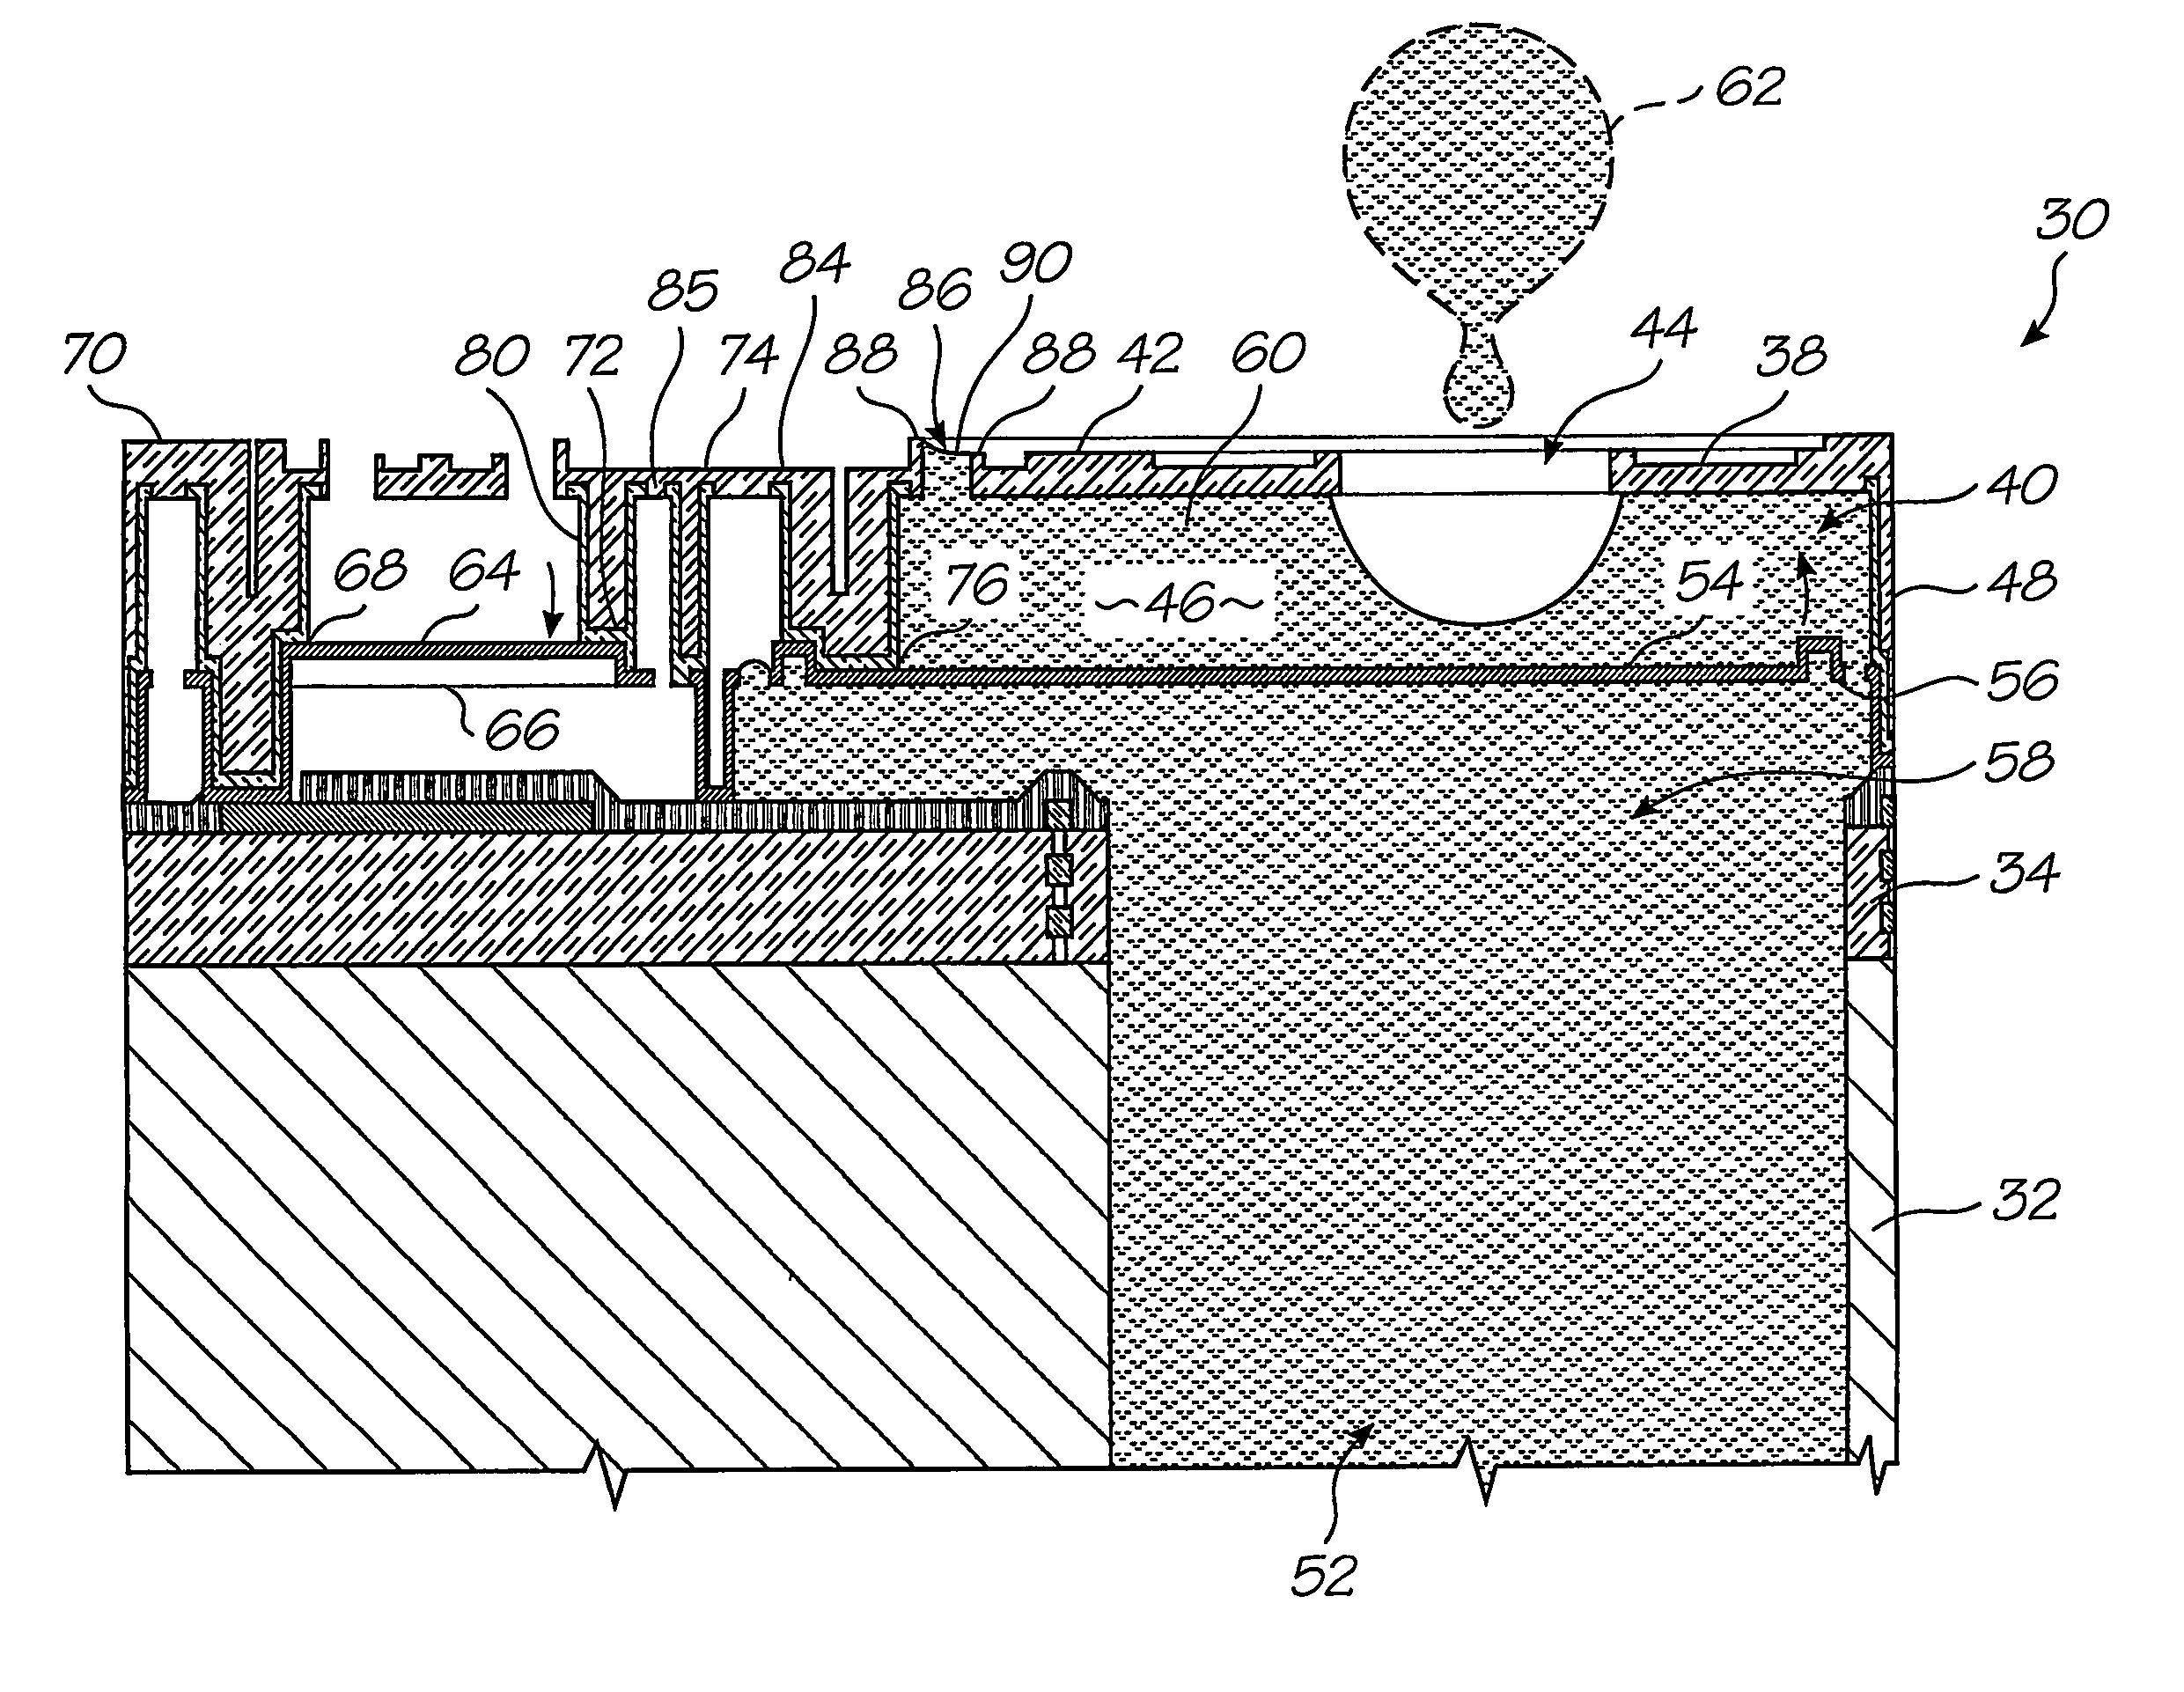 Motion transmitting structure for a nozzle arrangement of a printhead chip for an inkjet printhead